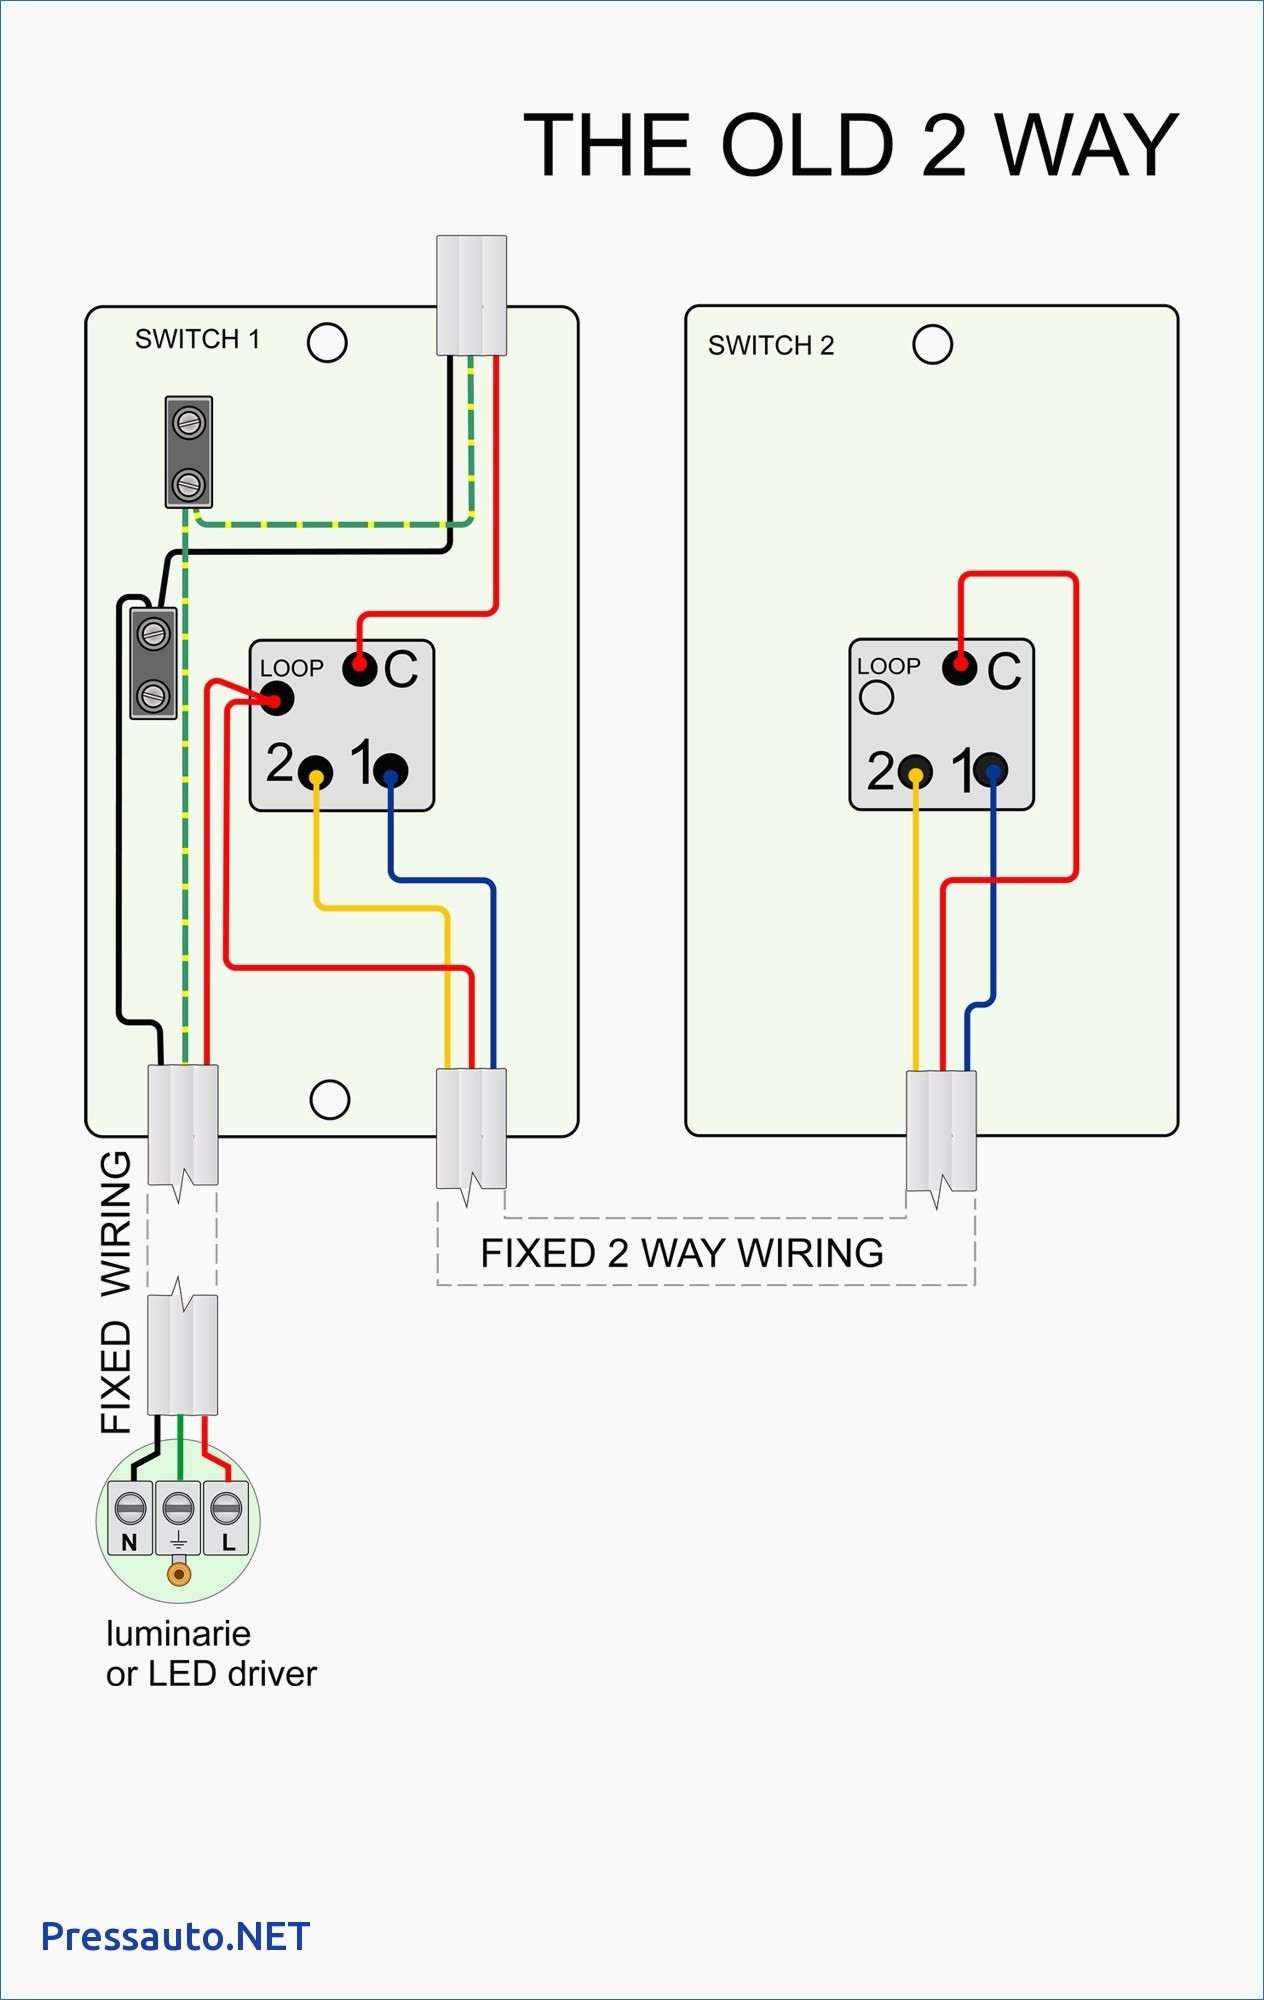 Tractor With Lights 2 Switches Wiring Diagram Beautiful Light Switch Way